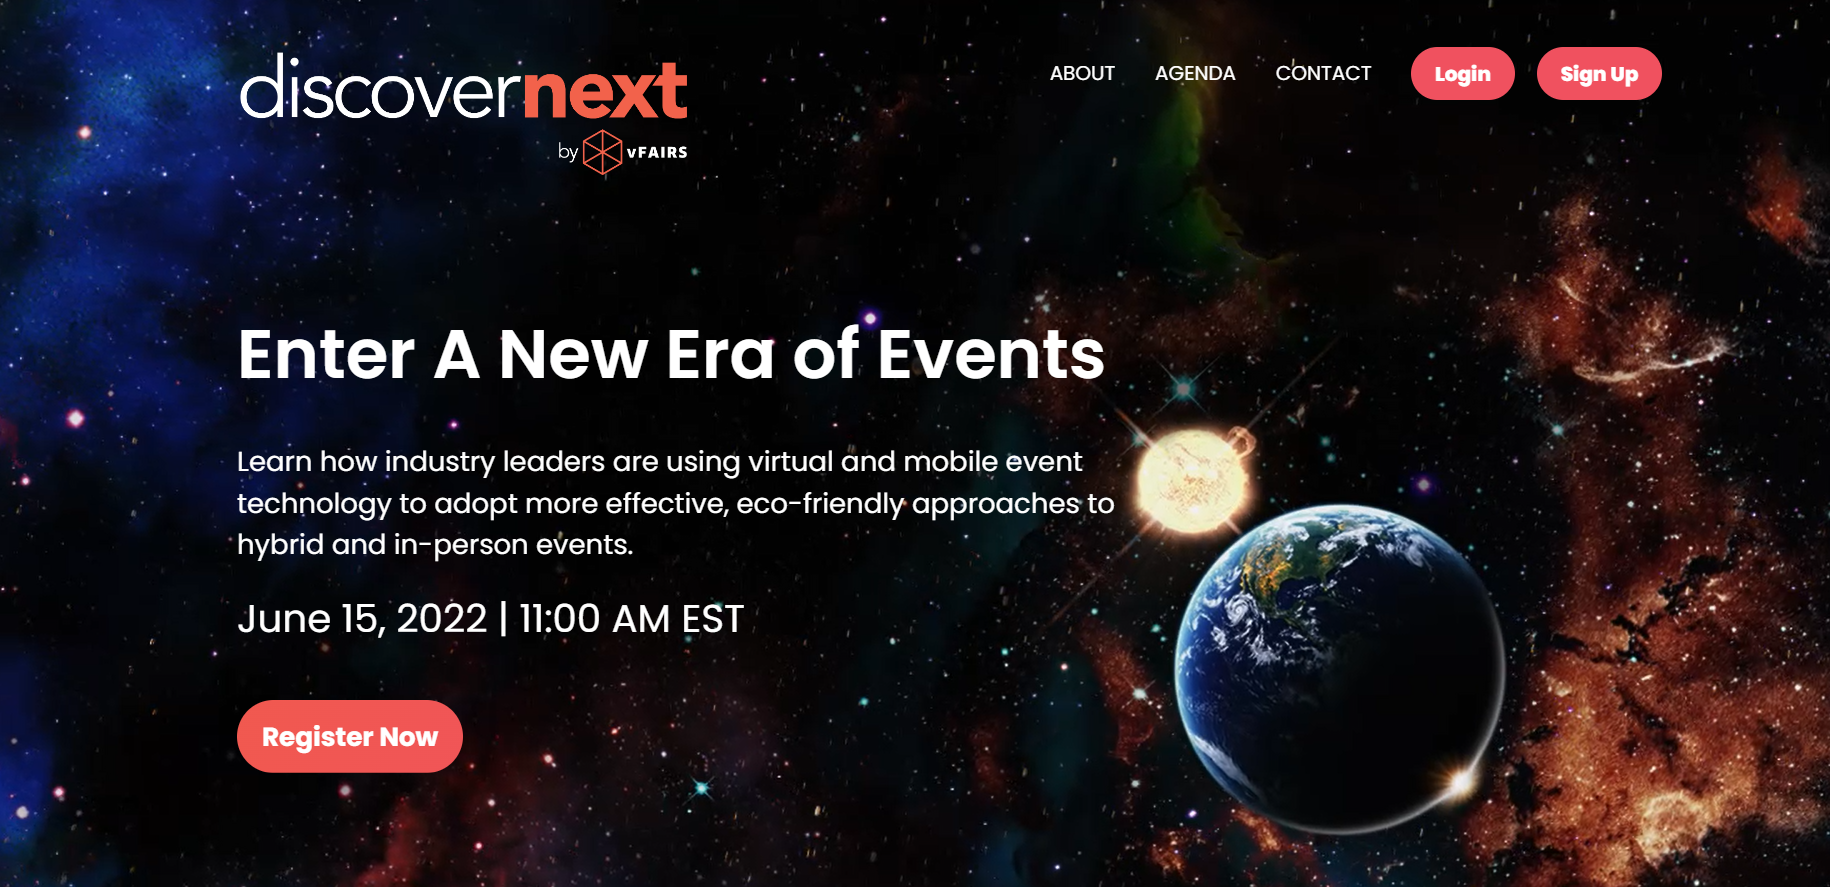 DiscoverNext 2022 | vFairs User Conference